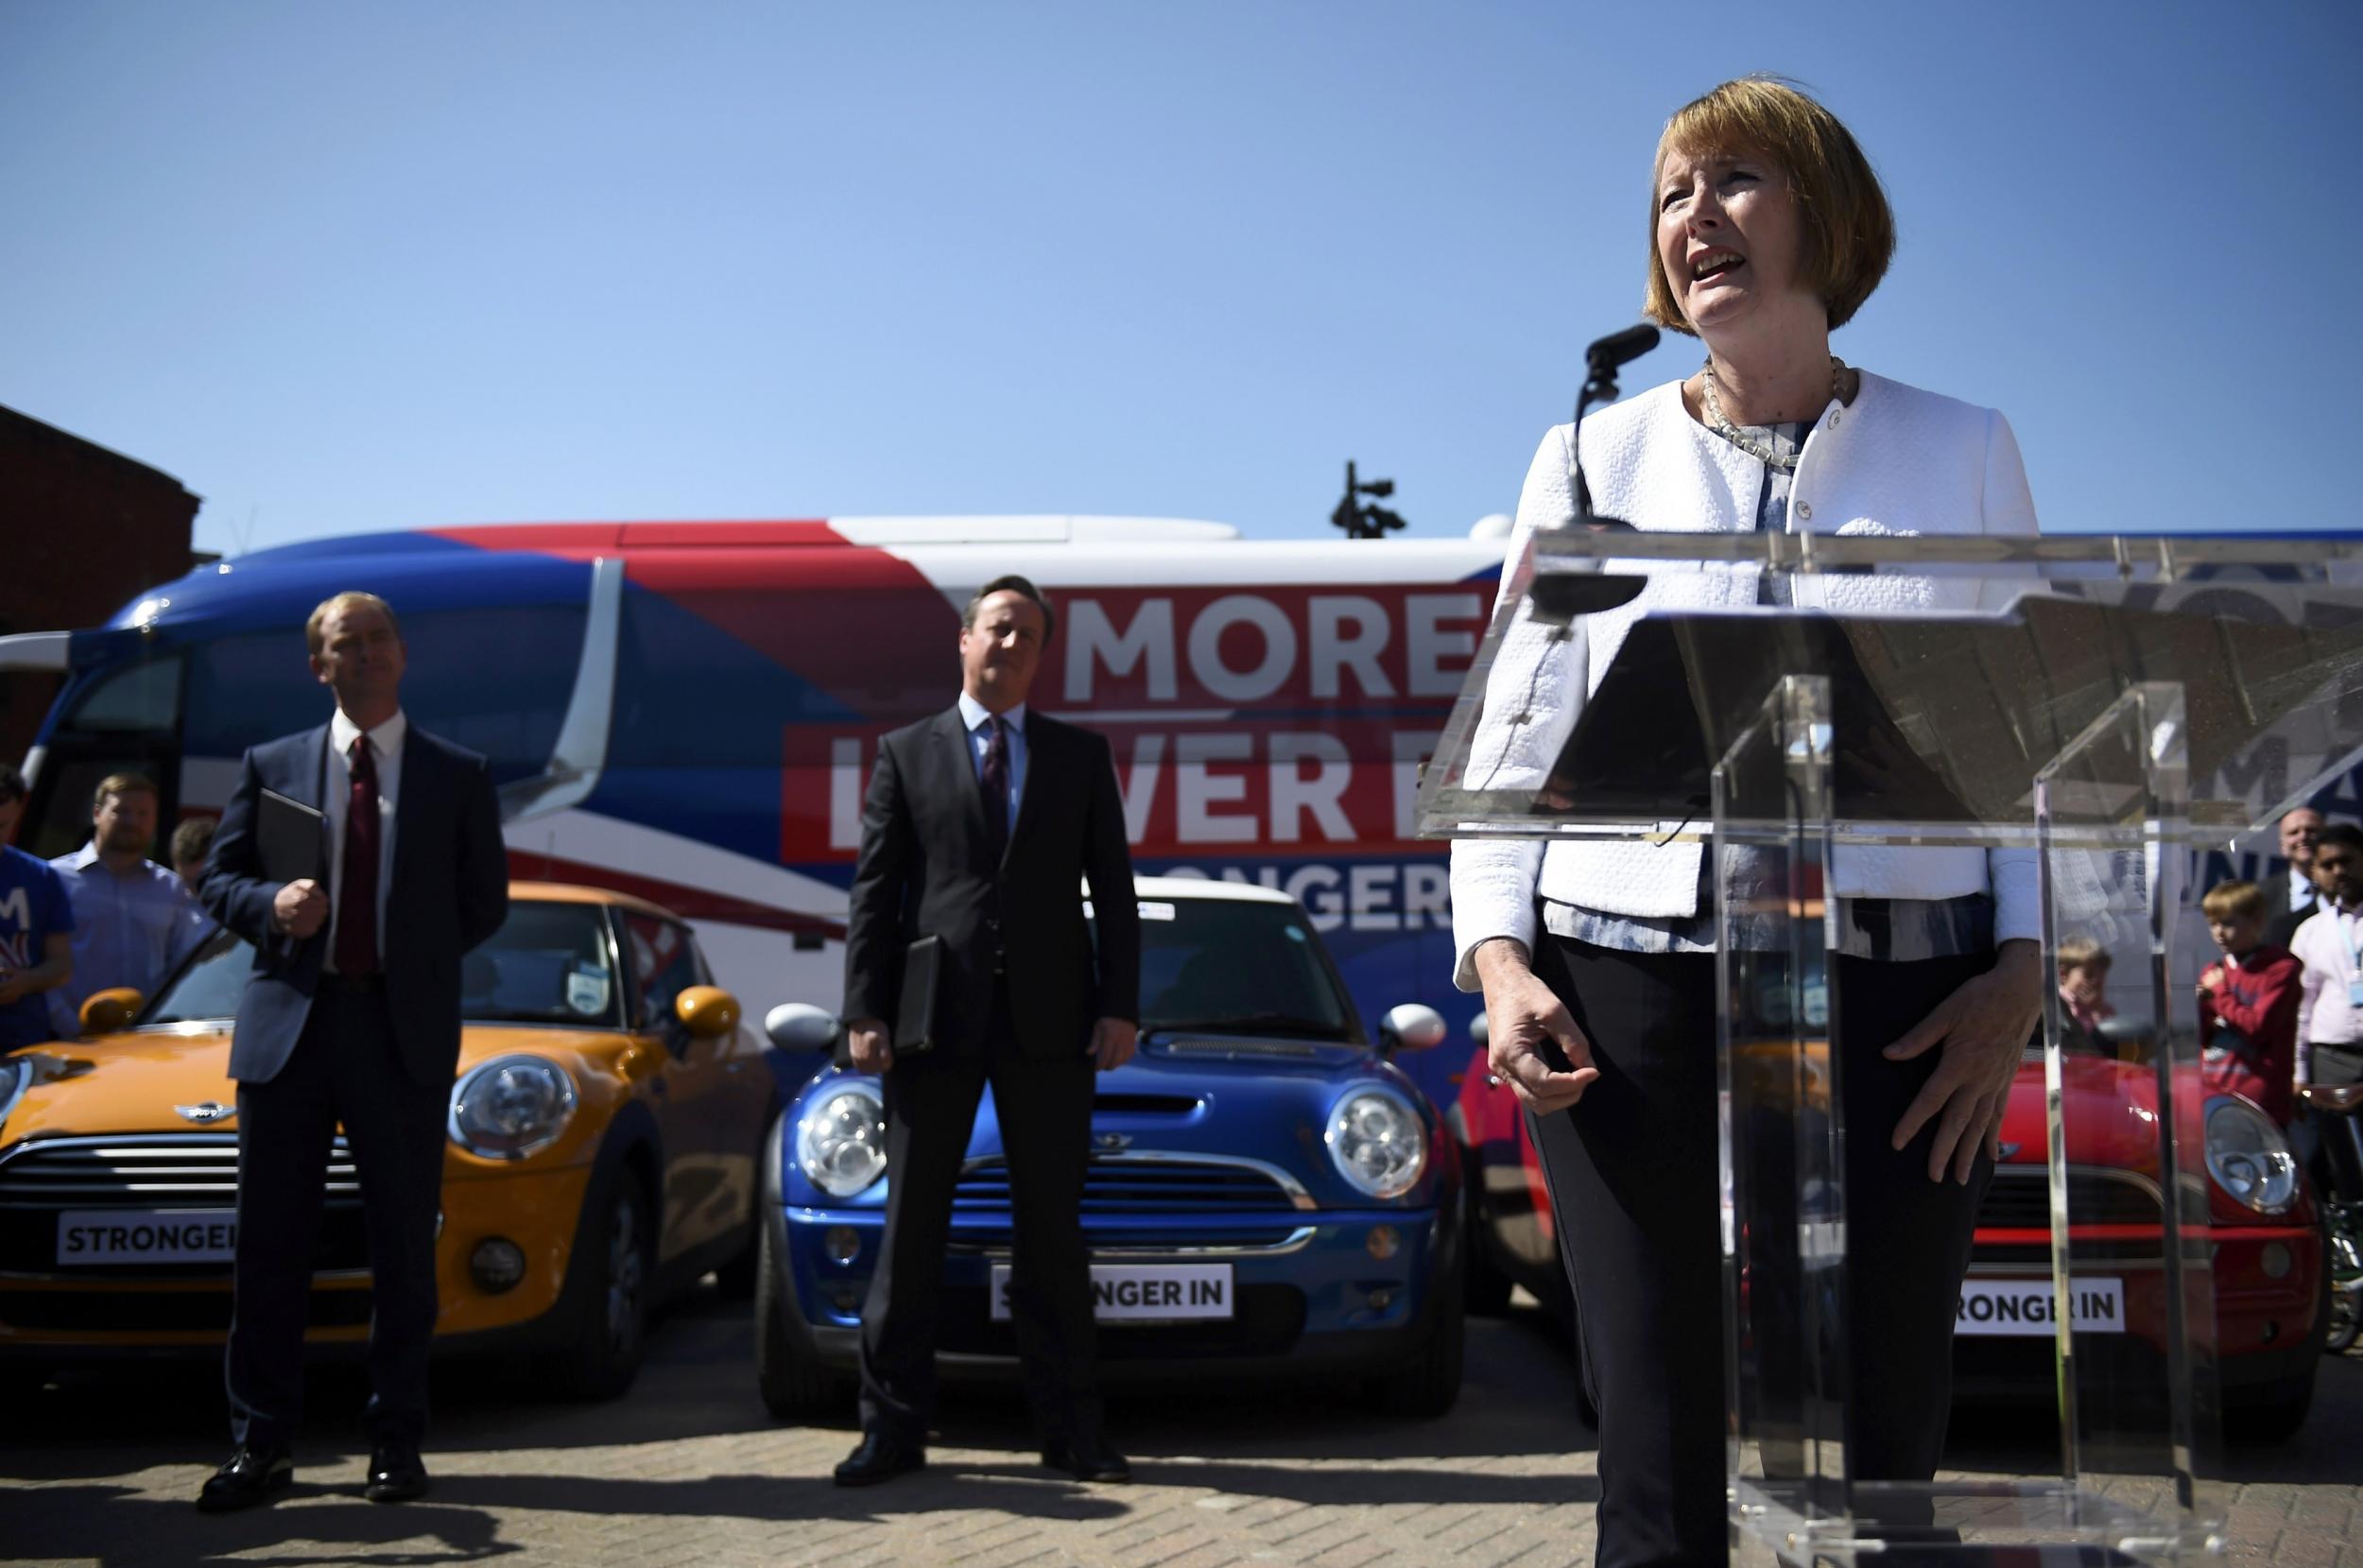 Labour MP Harriet Harman speaks as Prime Minister David Cameron and Democrat Leader Tim Farron (left) watch, during a Britain Stronger In Europe campaign event at the Oval cricket ground in London.